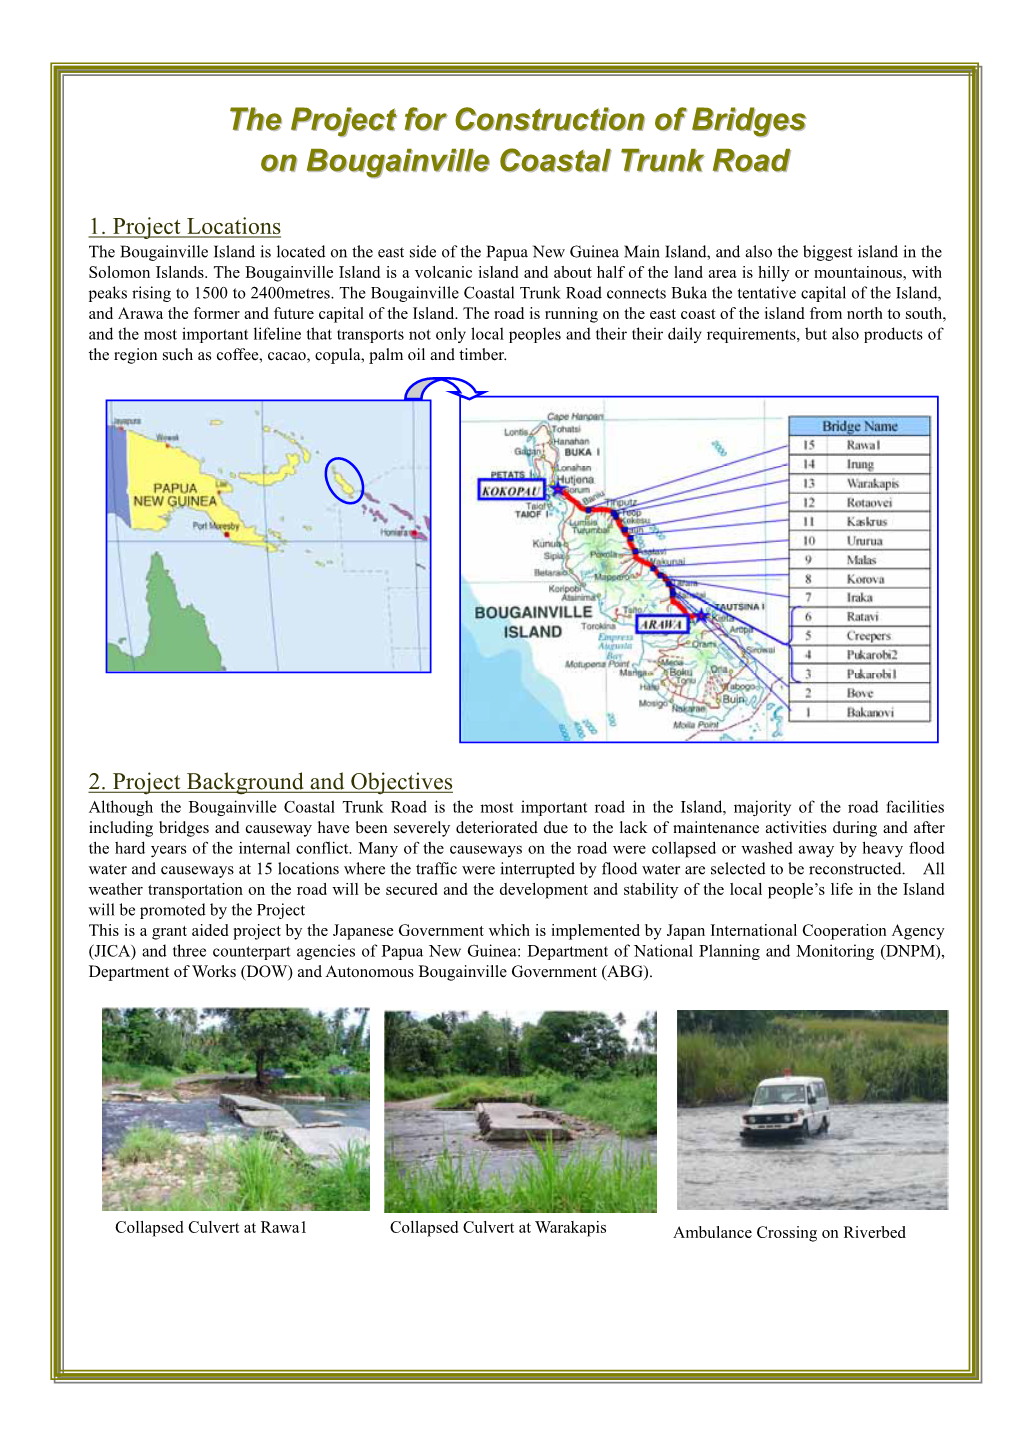 The Project for Construction of Bridges on Bougainville Coastal Trunk Road